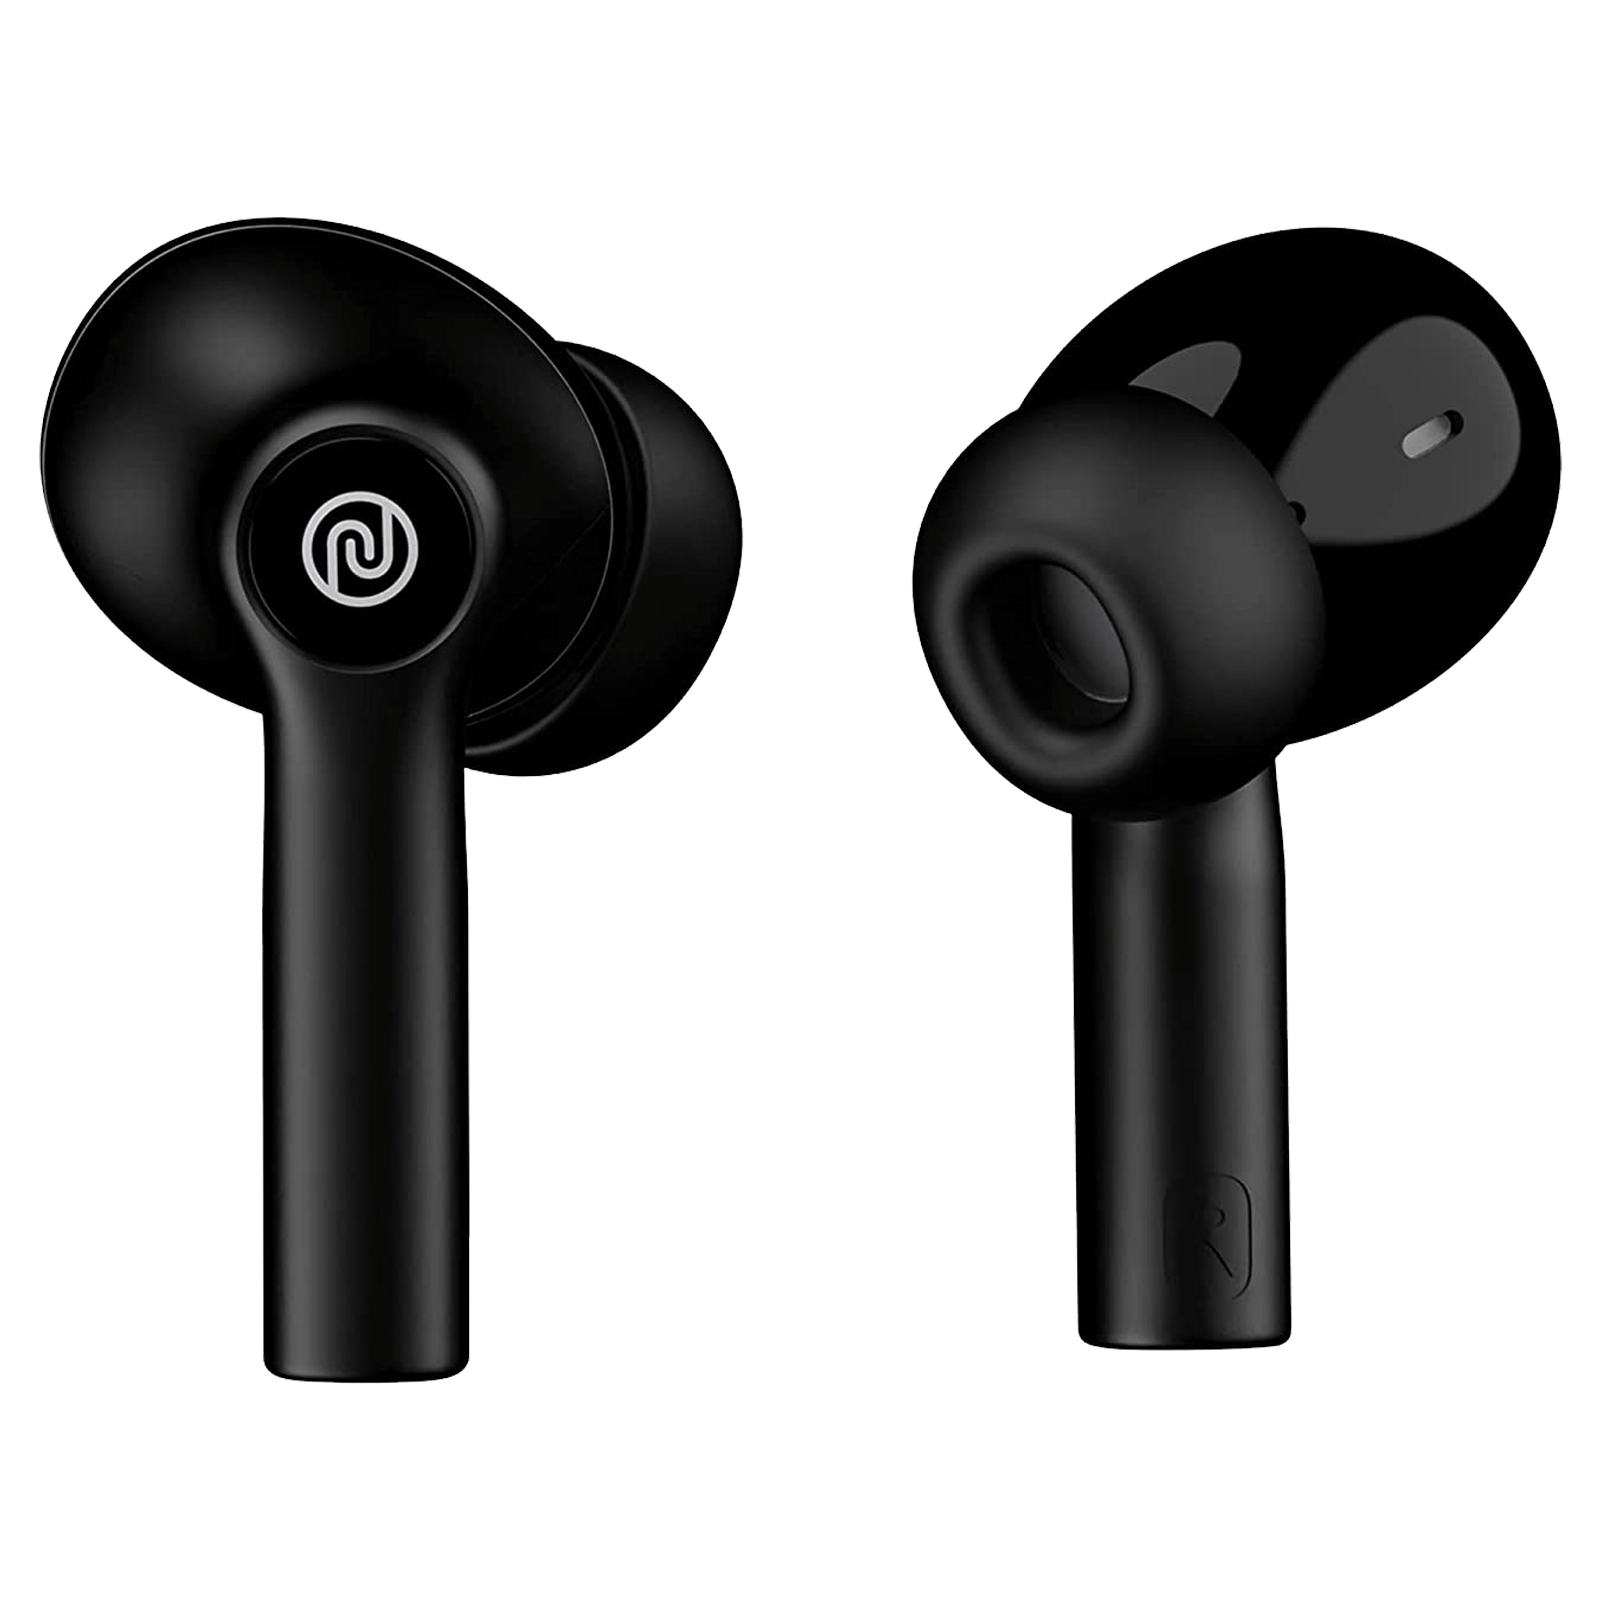 Noise Buds VS103 AUD-HDPHN-BUDSVS10 In-Ear Truly Wireless Earbuds with Mic (Bluetooth 5.0, Hyper Sync Technology, Jet Black)_2